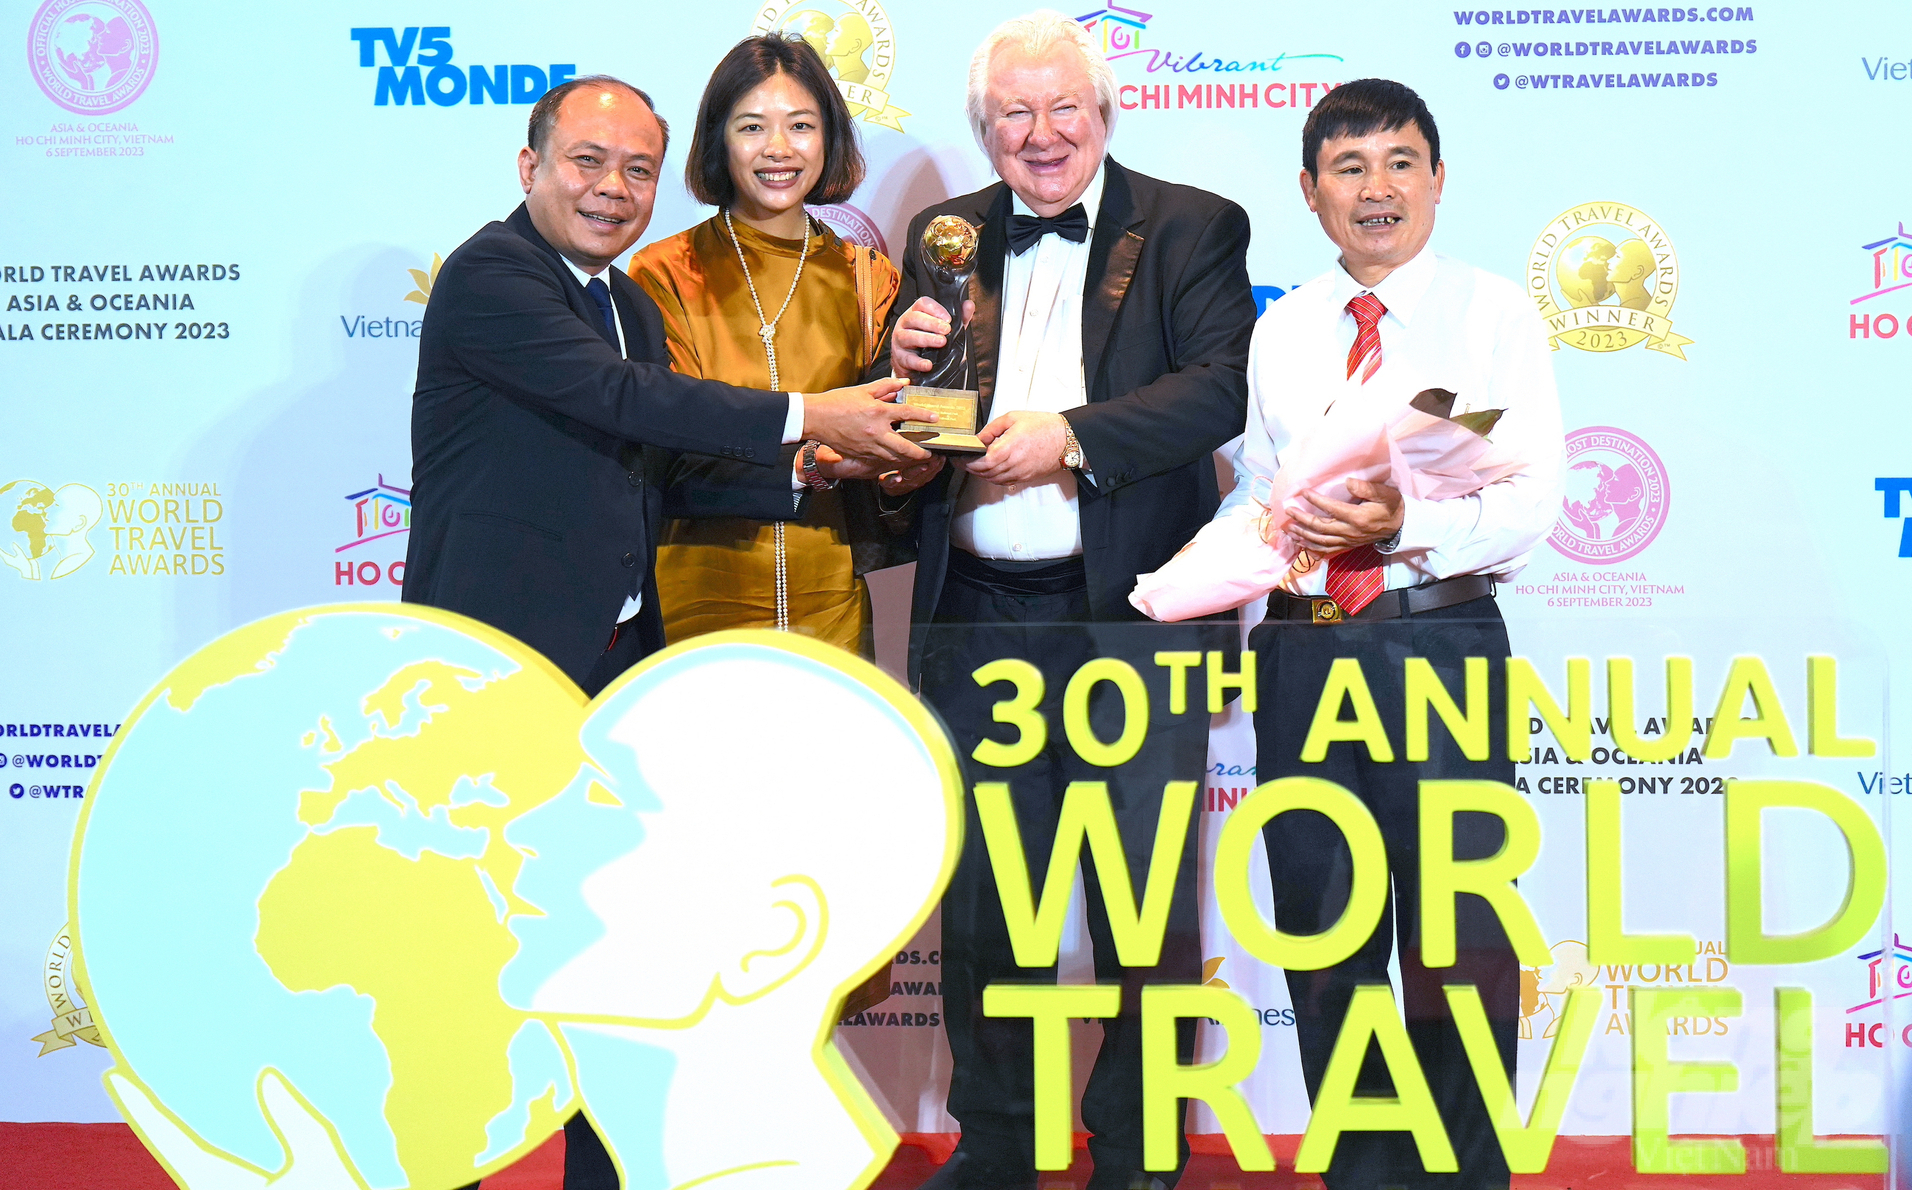 Graham Cooke (second from right), Chairman of the World Travel Awards, shared joy with the leaders of Cuc Phuong National Park. Photo: Hong Thuy.